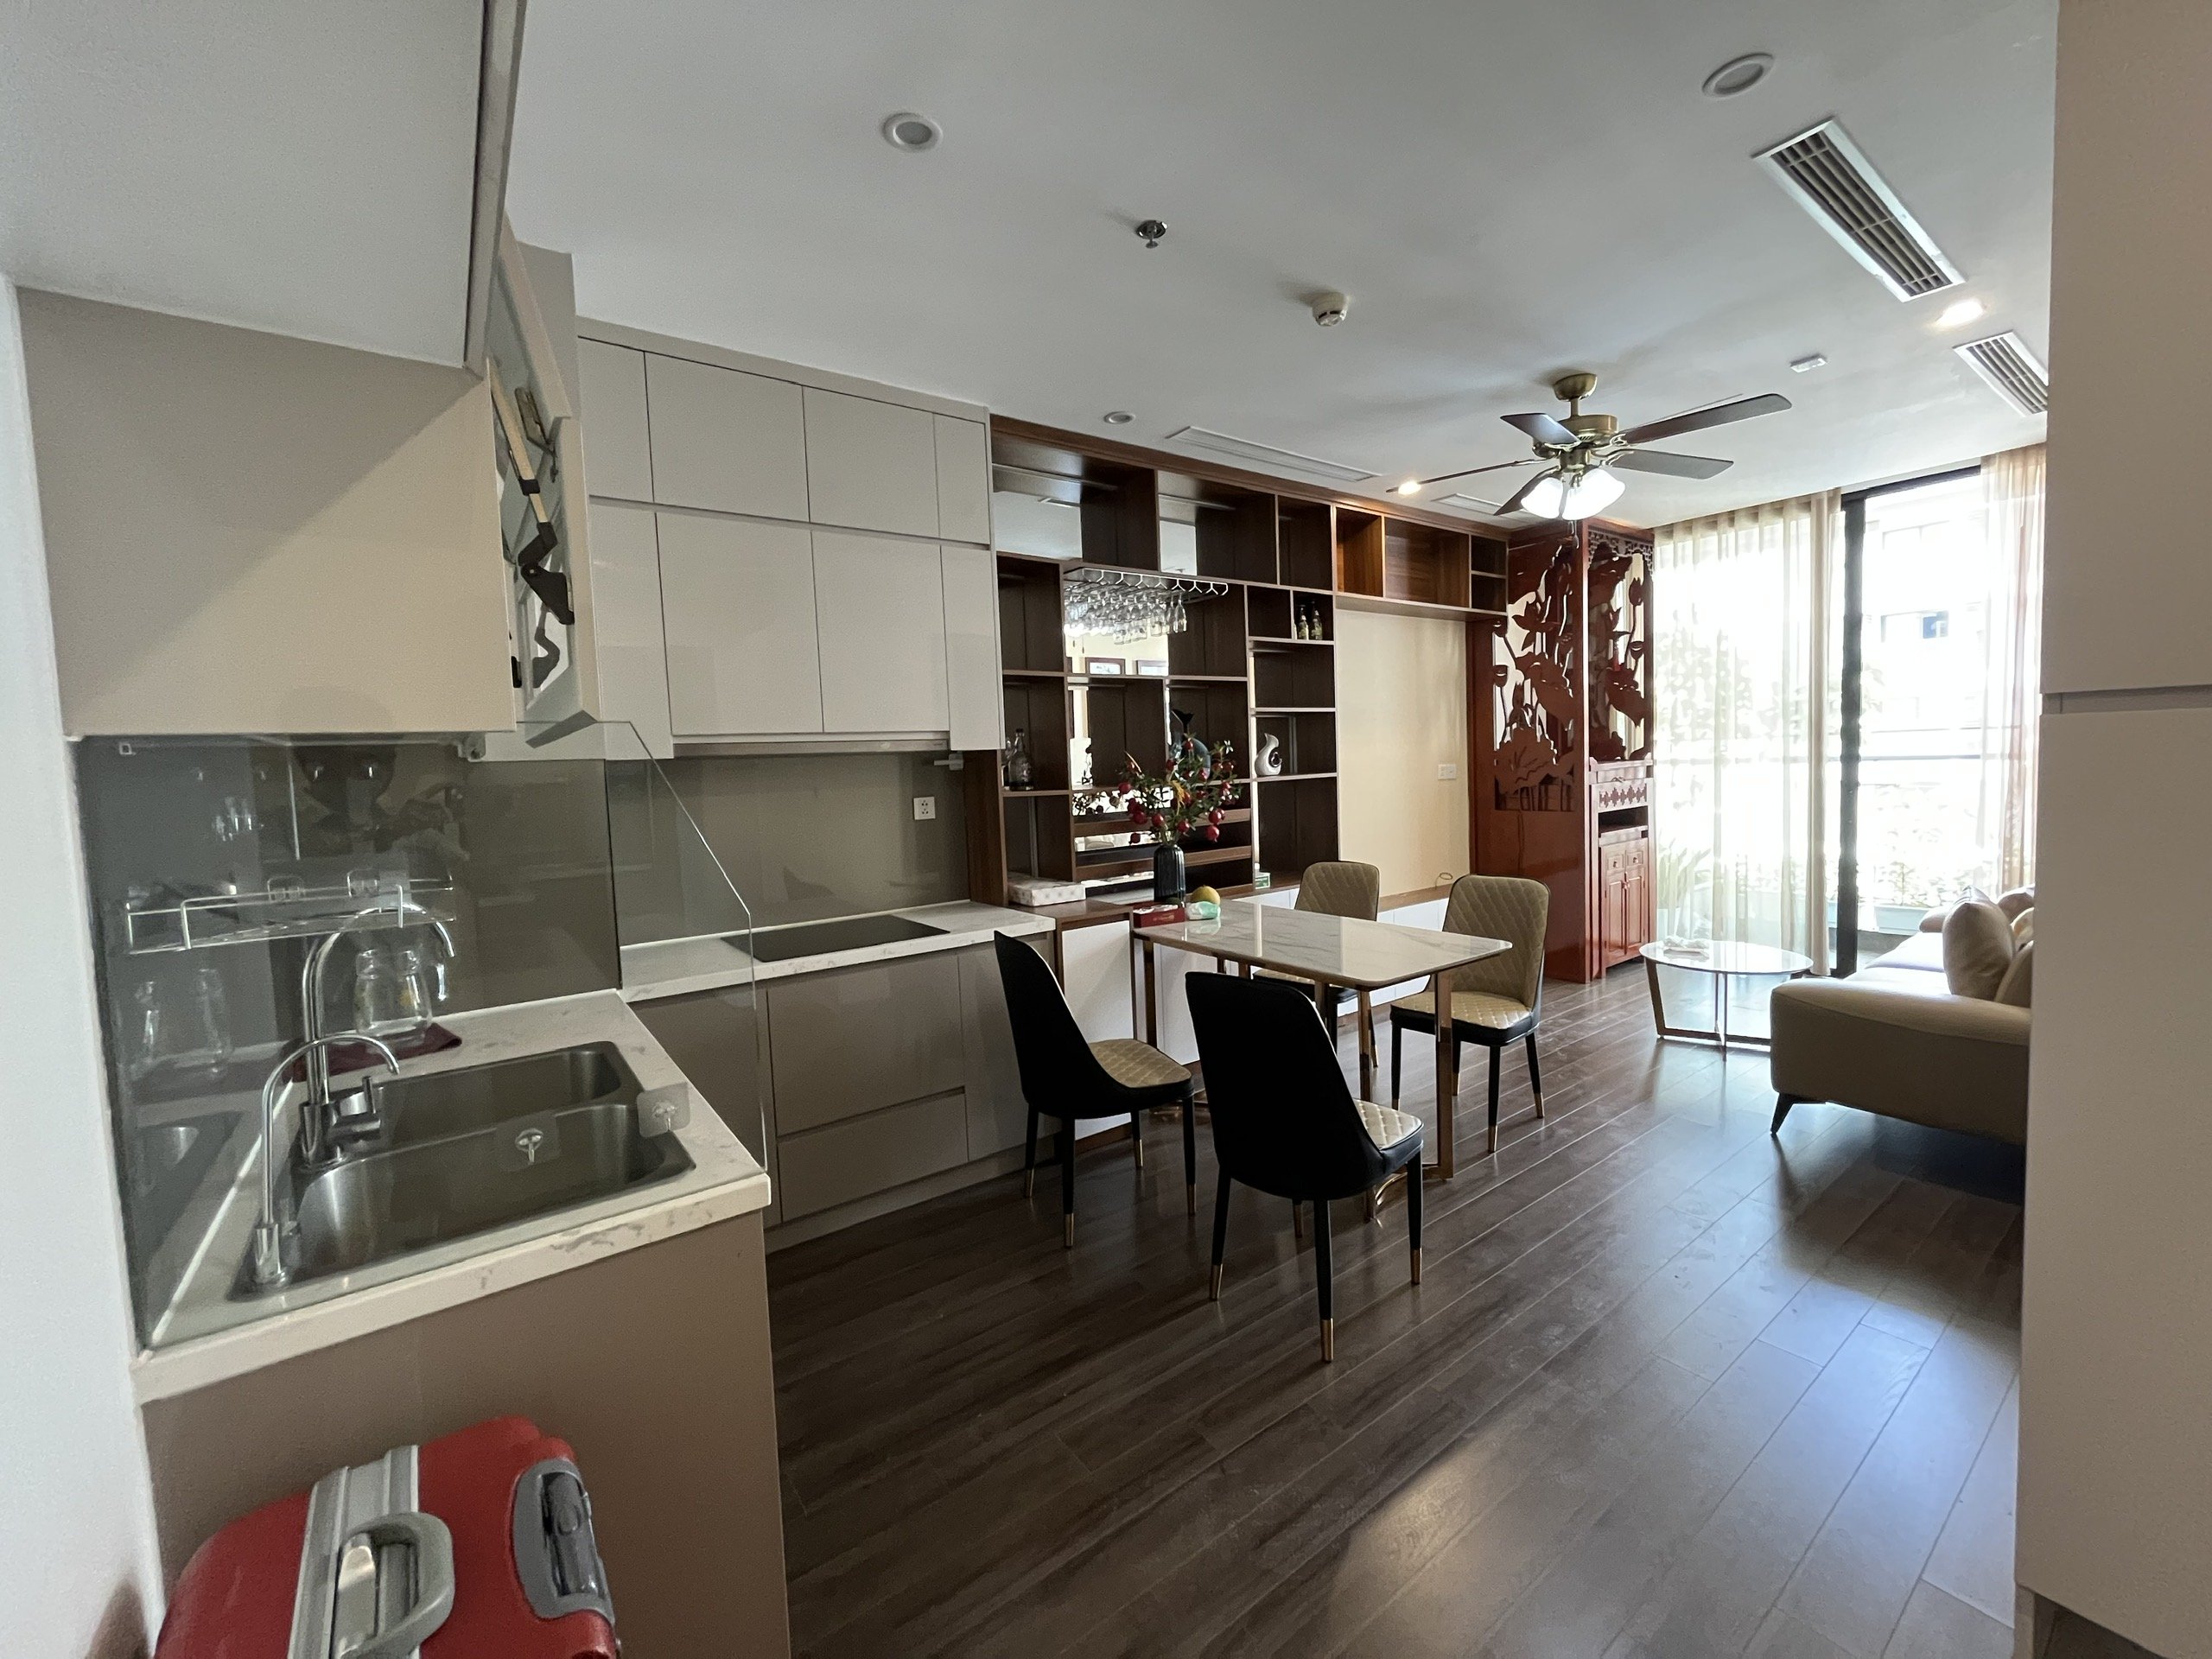 2 Bedroom Apartment for rent with full furniture of S6B building at Vinhomes Symphony 4